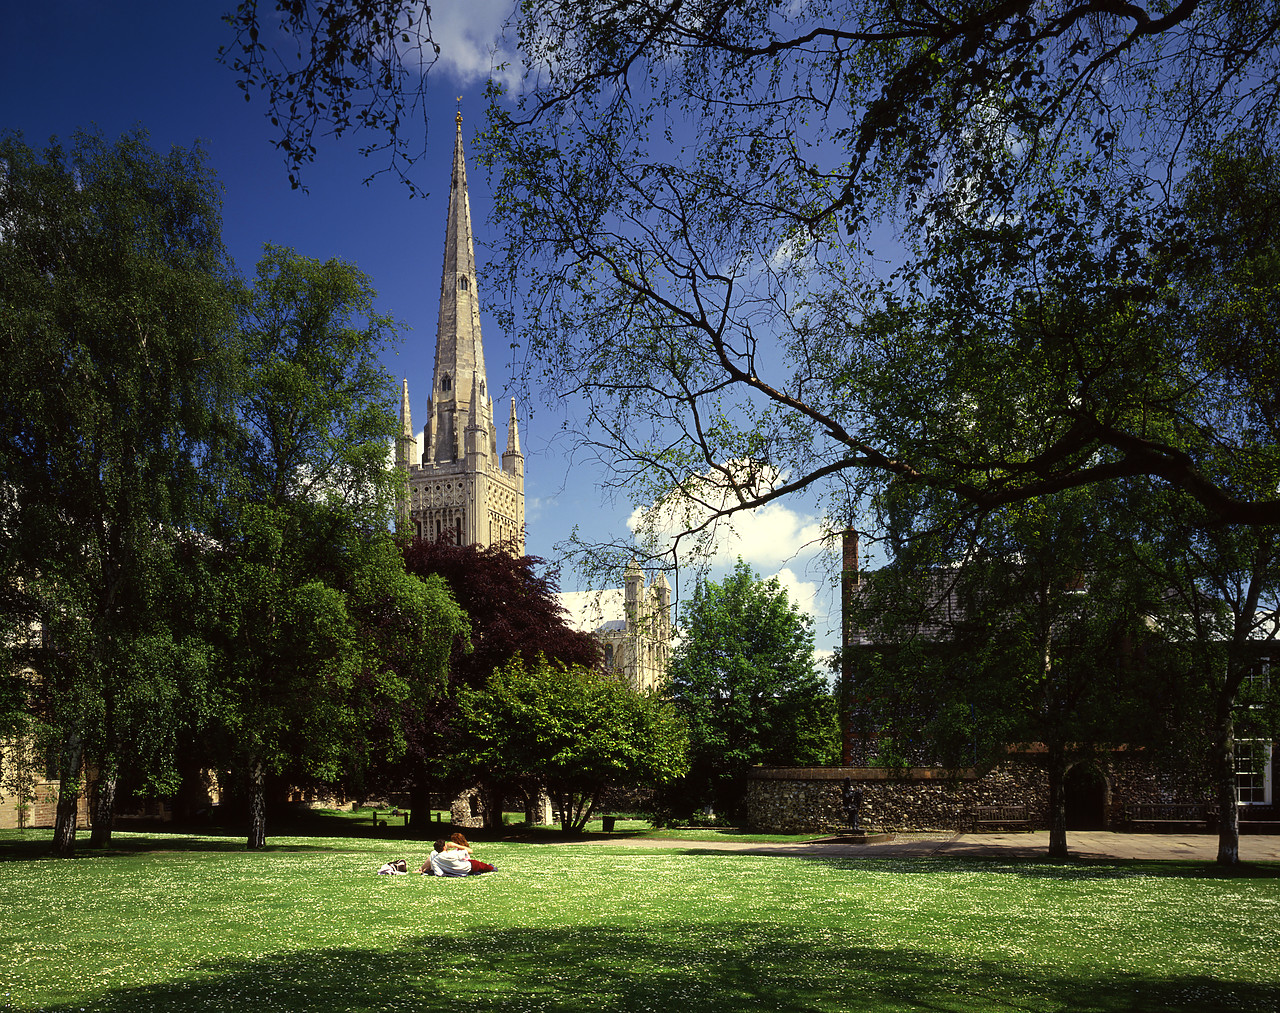 #87906-1 - Norwich Cathedral, Norfolk, England